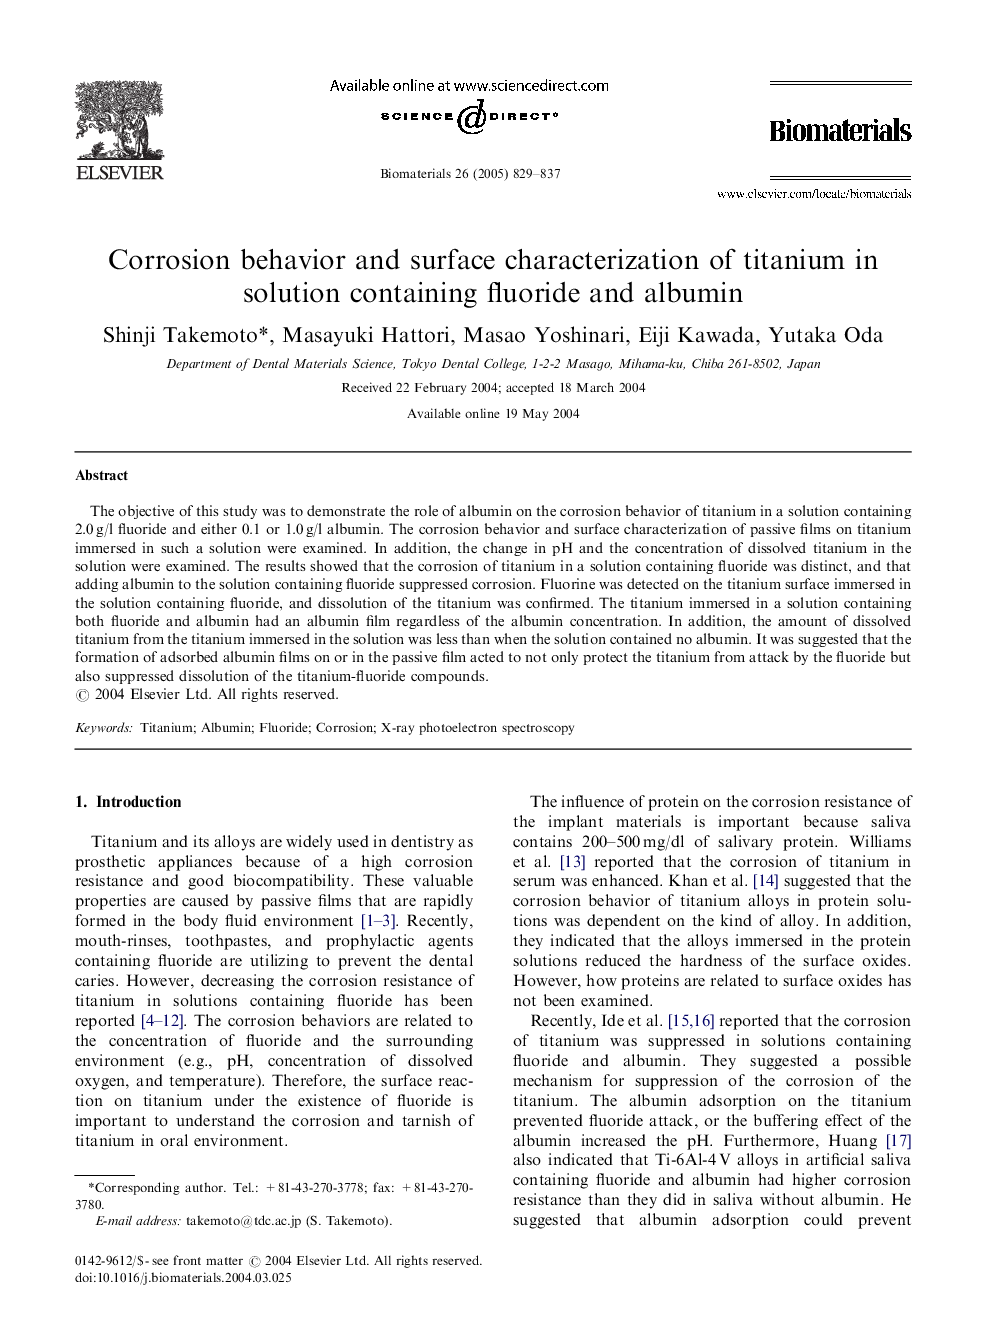 Corrosion behavior and surface characterization of titanium in solution containing fluoride and albumin